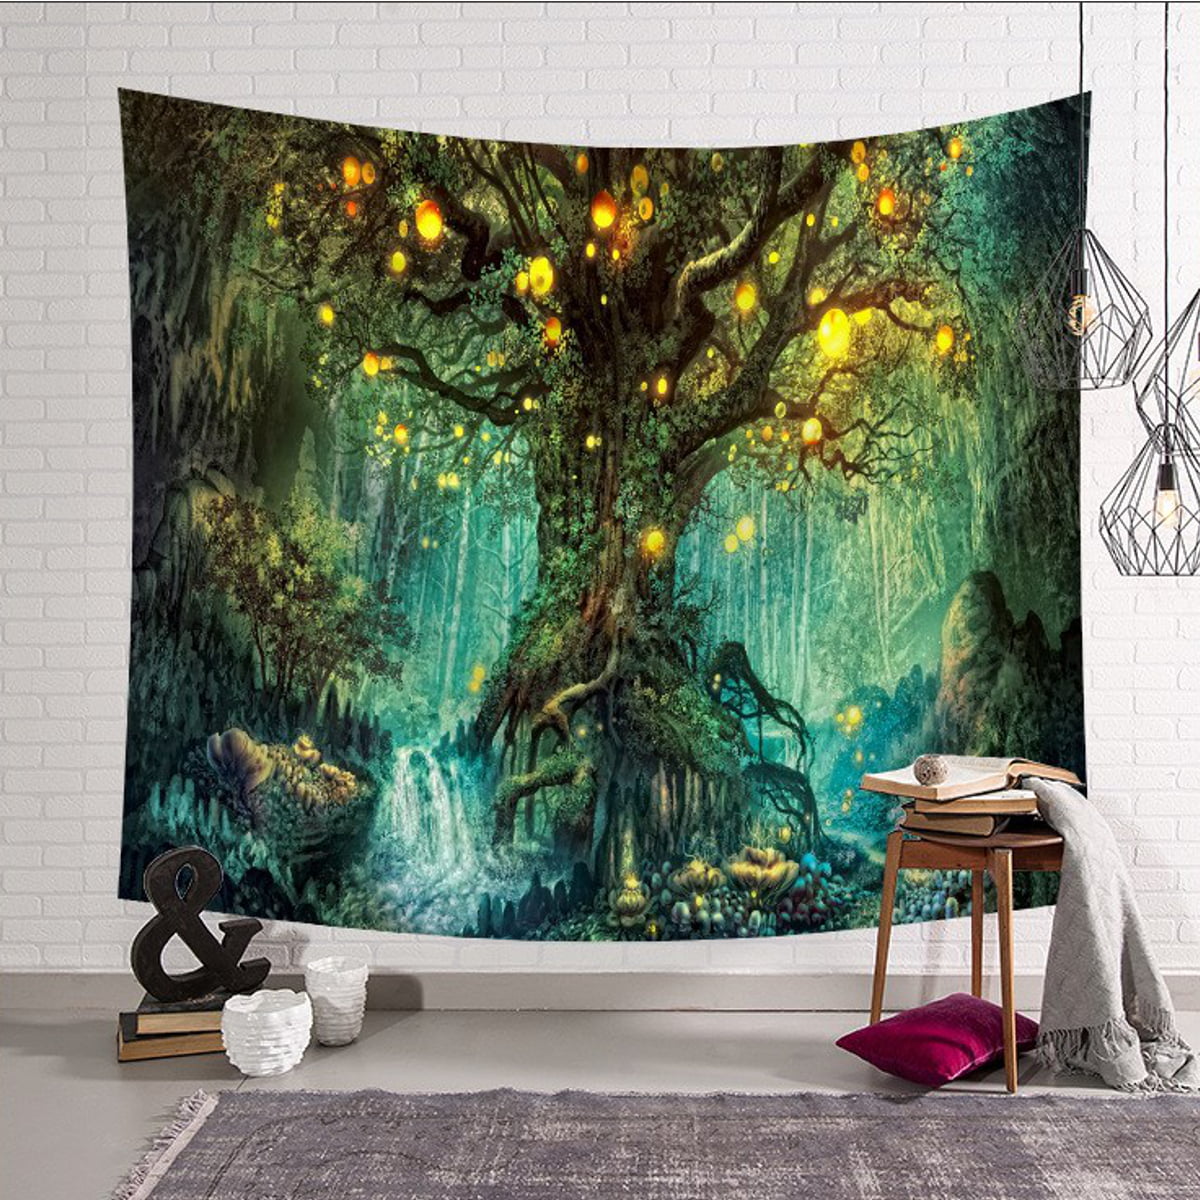 NYMB Jungle Tapestry Wall Hanging Nature Scenery Misty Tapestry for Bedroom Living Room Dorm 60''WX40''L Rainforest Landscape Tapestry Green Forest Tapestries Wall Art Hanging